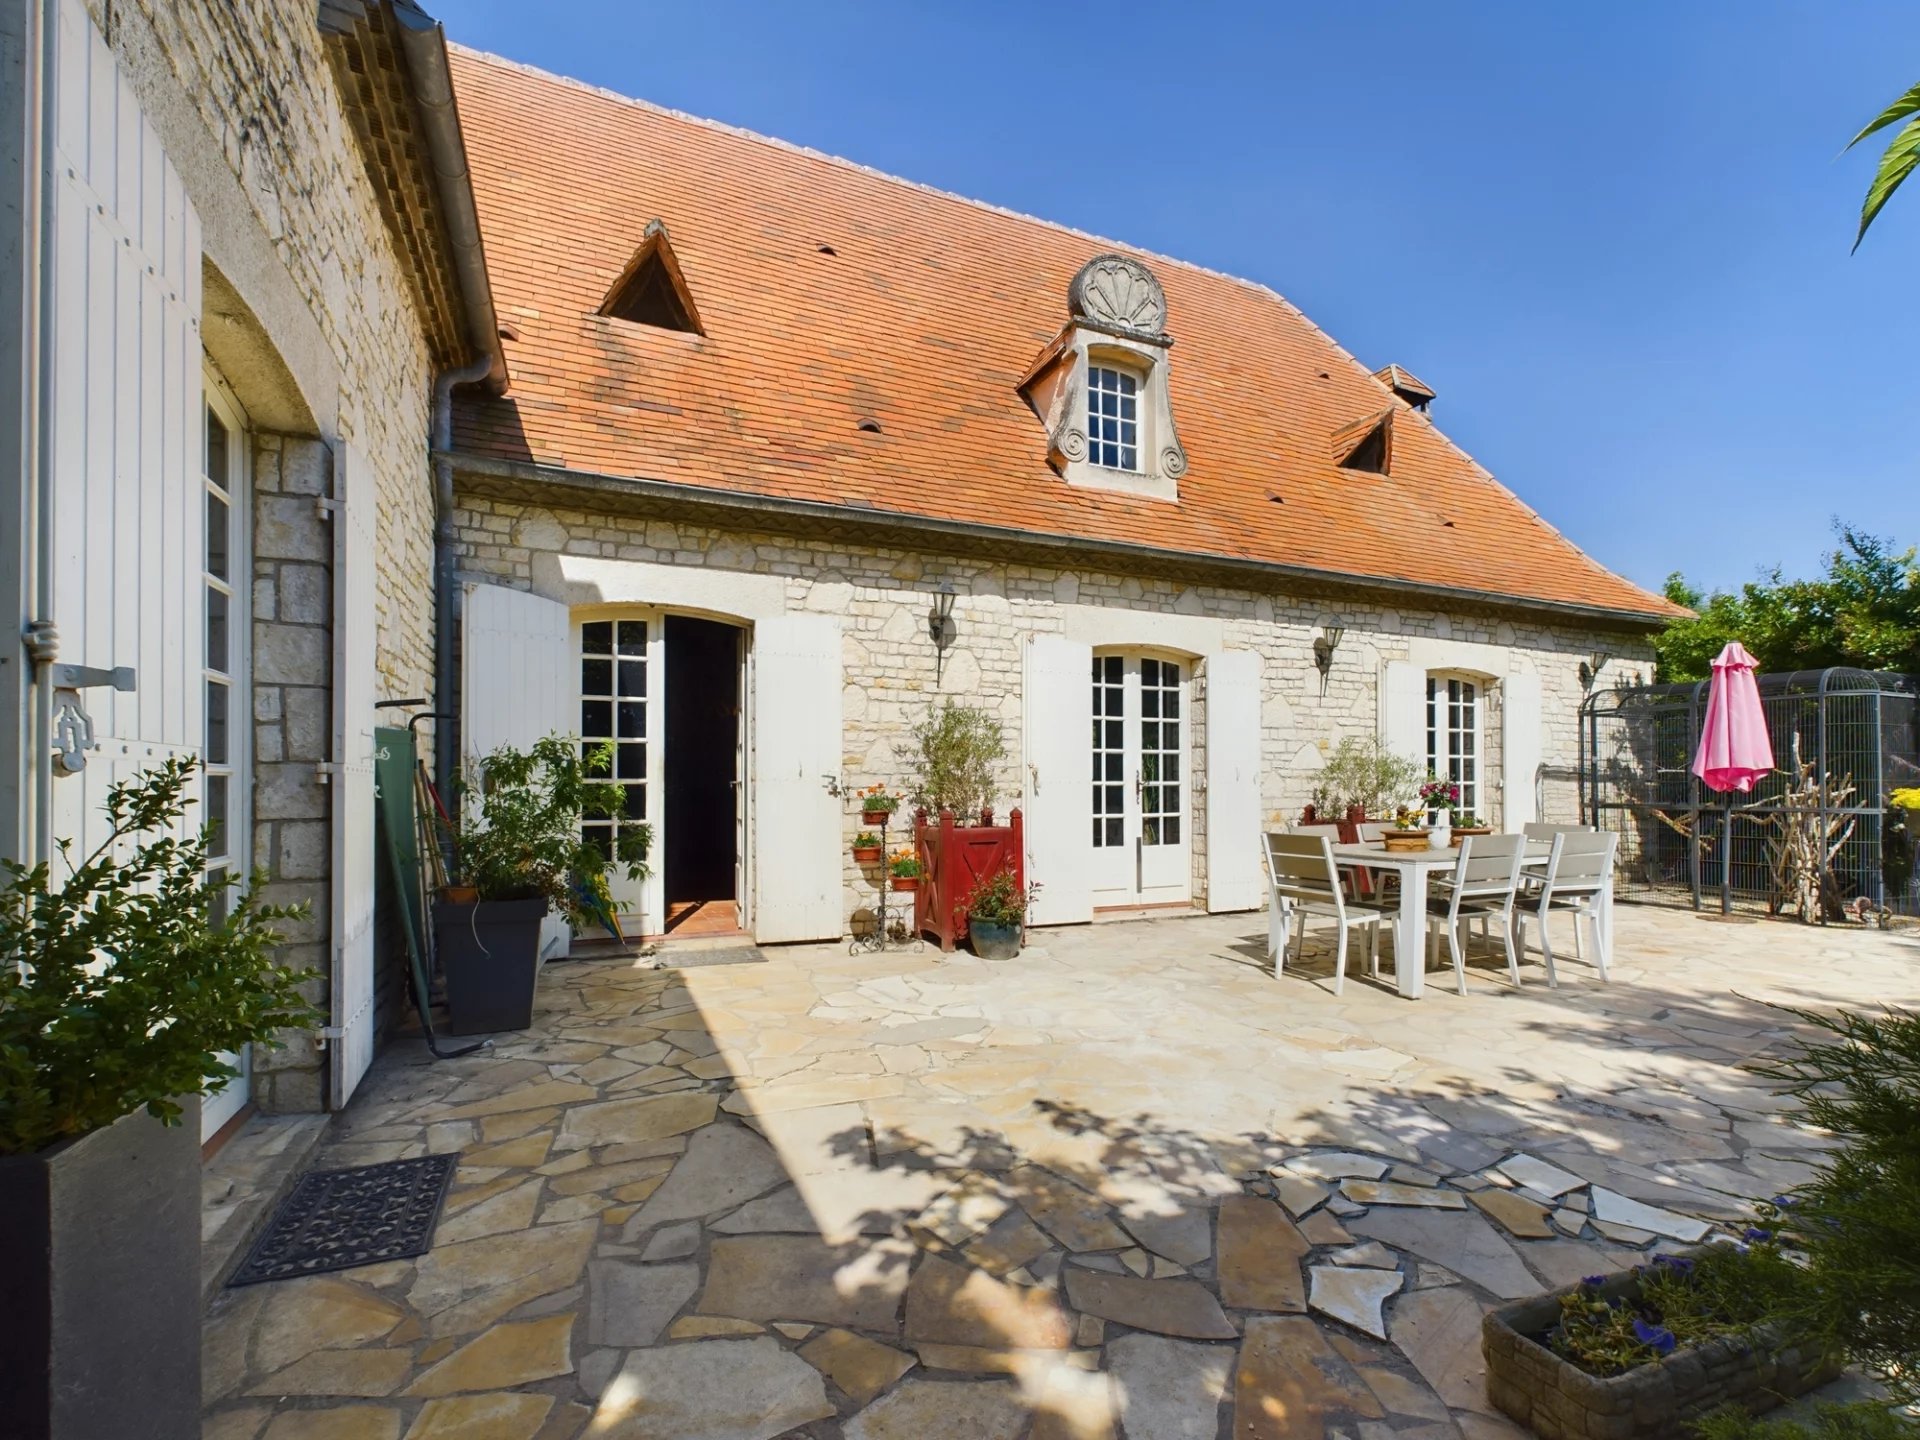 Detached house on the edge of a village close to Bergerac